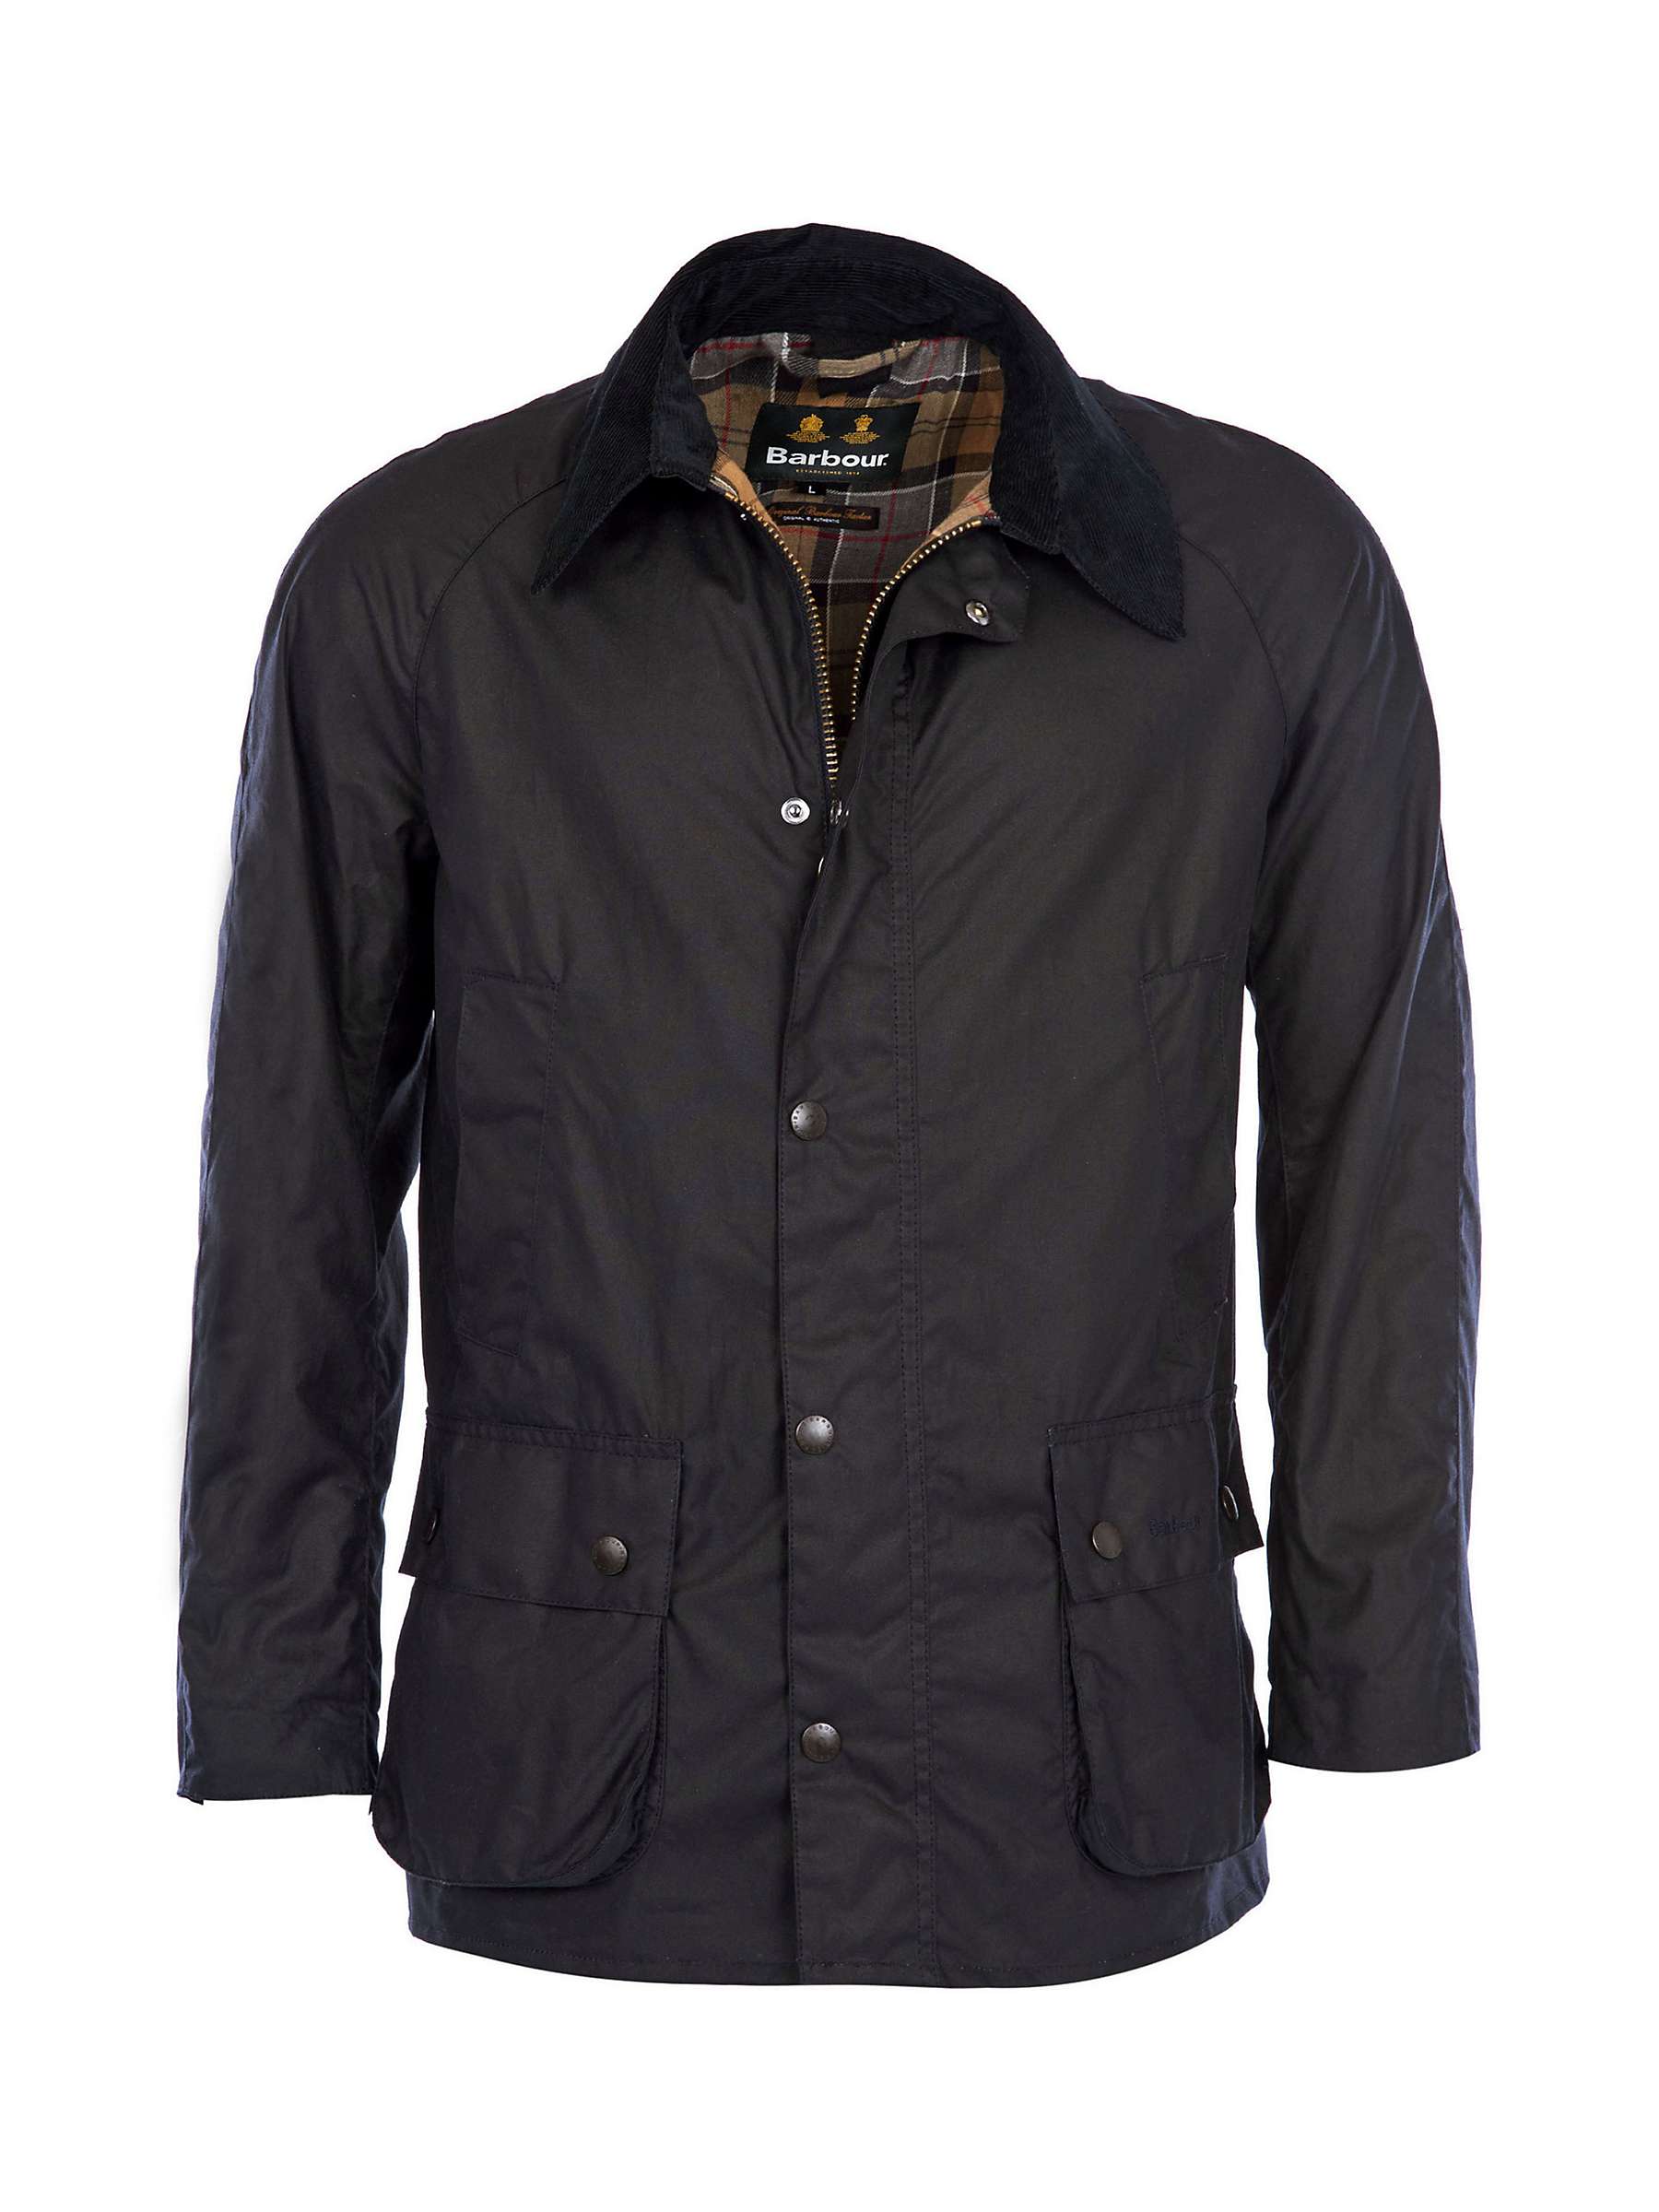 Barbour Ashby Waxed Field Jacket, Navy at John Lewis & Partners